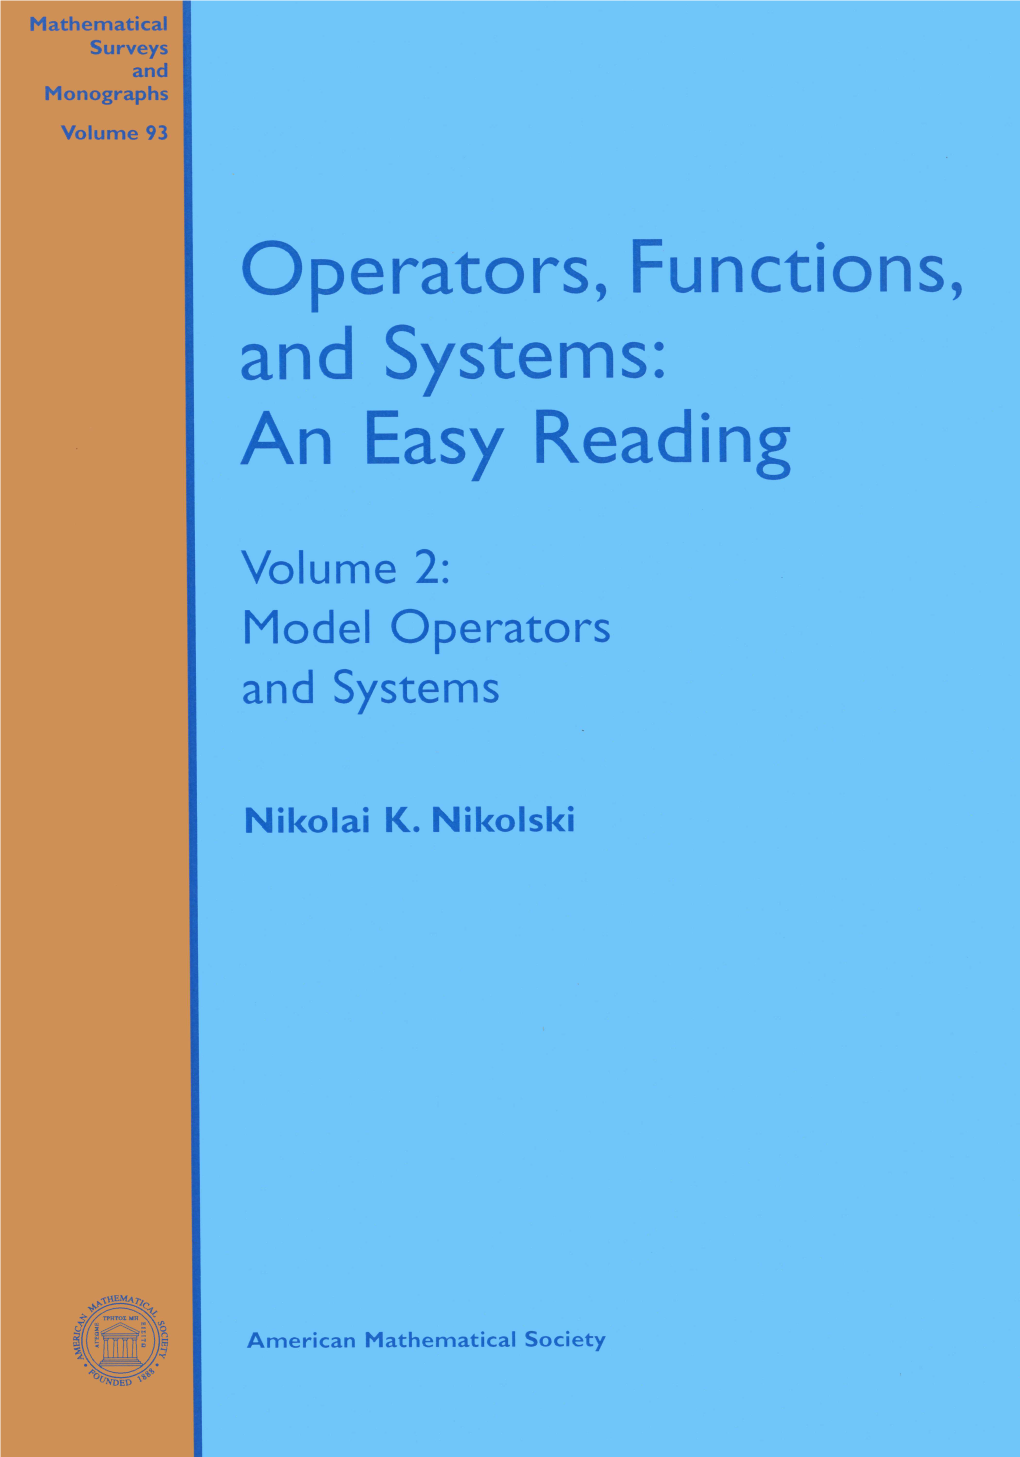 Operators, Functions, and Systems:An Easy Reading Volume